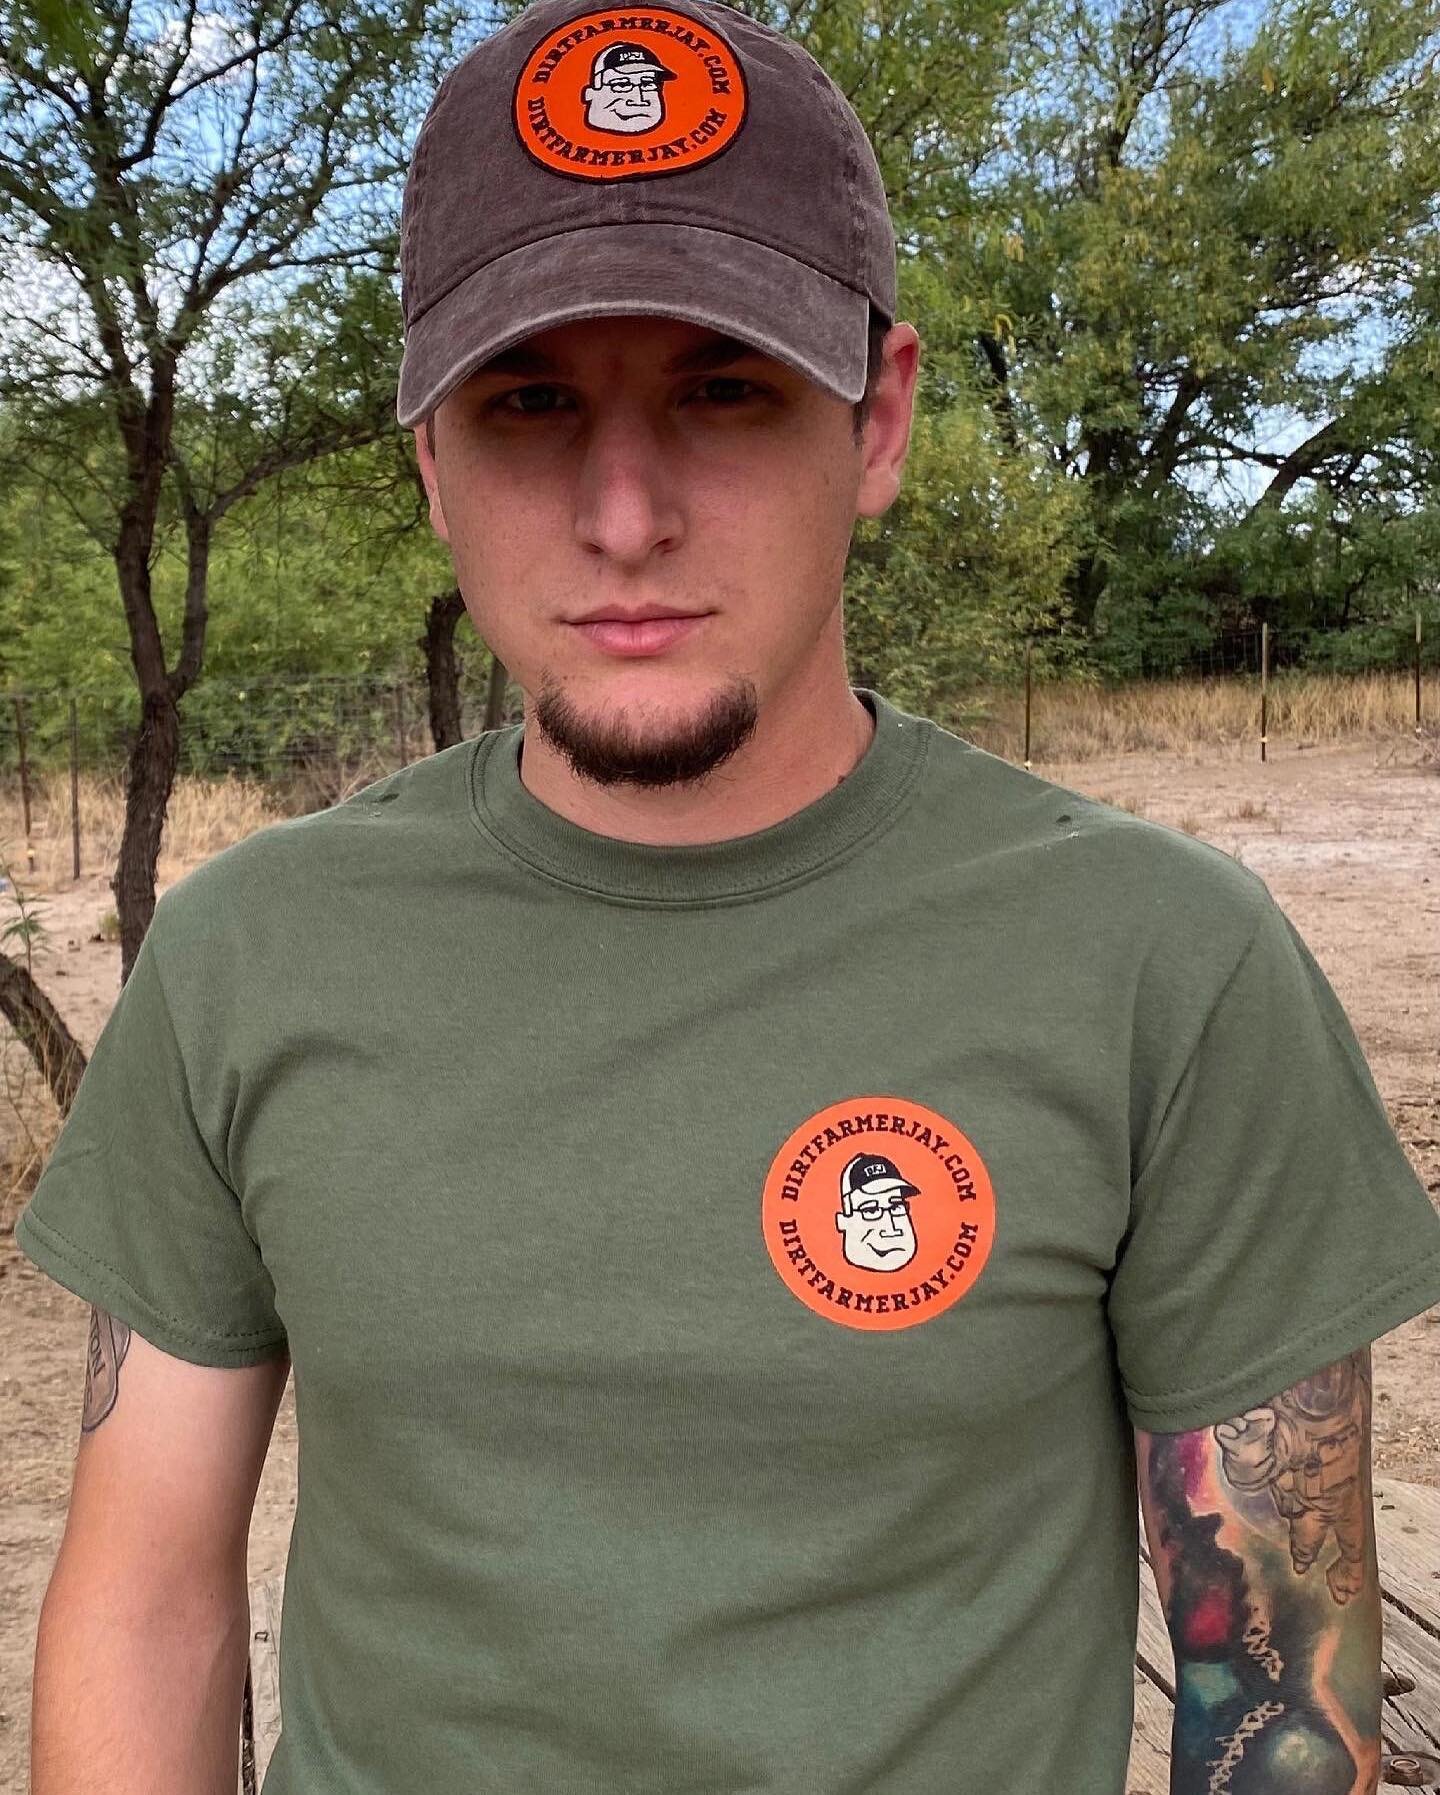 Stocks are running low! Make sure you hop on over to DirtFarmerJay.com. These aren&rsquo;t your average light shirts. These shirts weigh in staring at 6.1 ounces. These are working shirts! #dirtfarmerj #dirtfarmin #utah #youtube